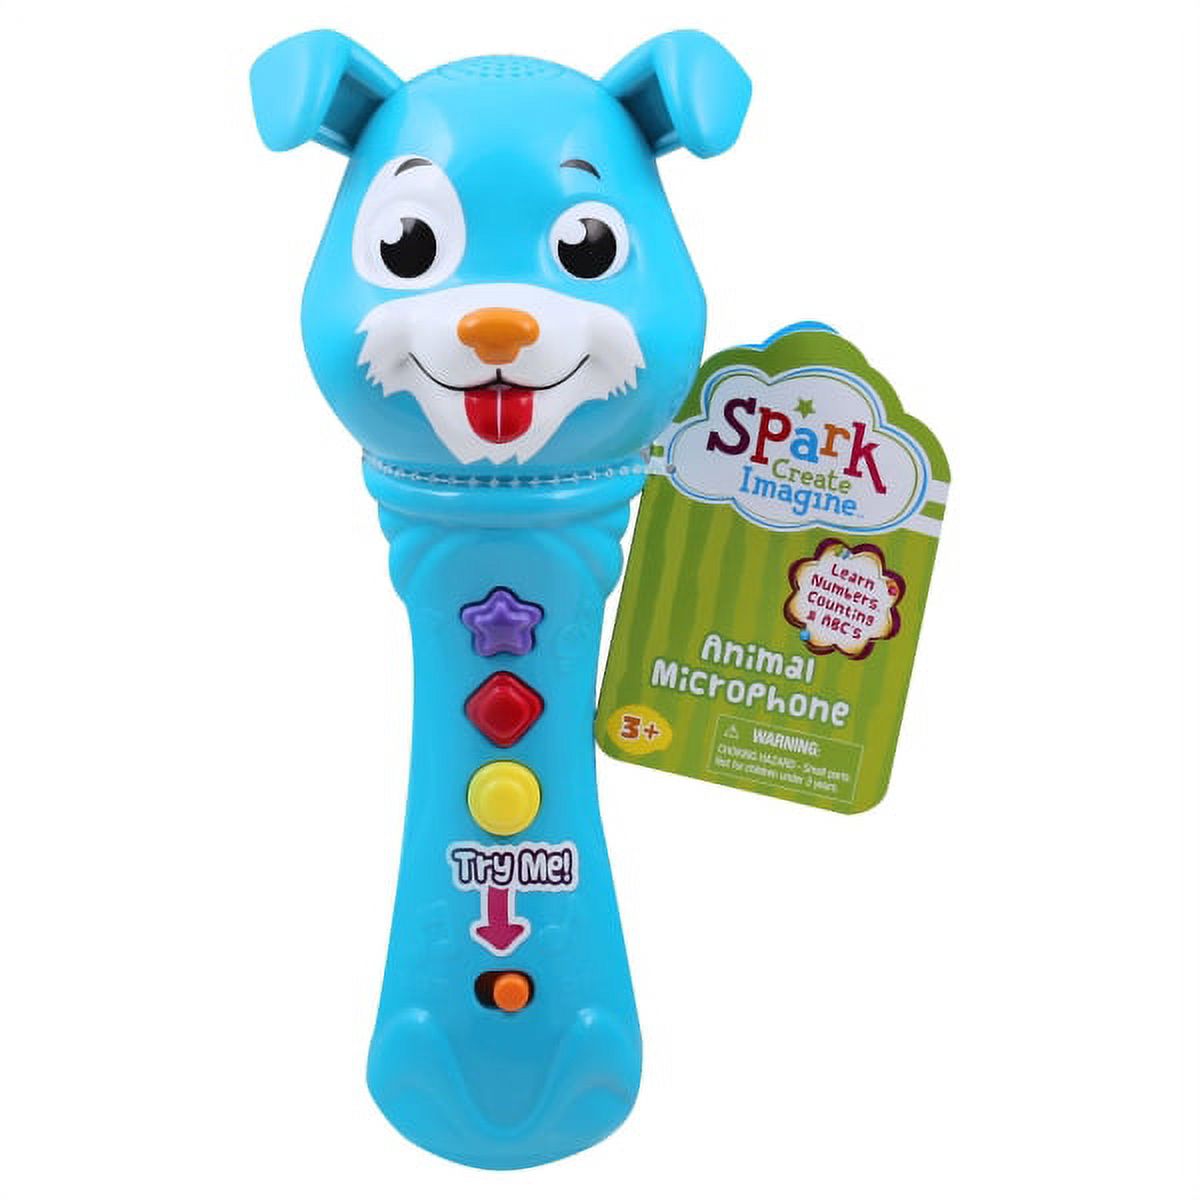 Spark Create Imagine Sing Along Dog Microphone for Kids, Cognitive Development, Ages 3 and Up, Blue - image 1 of 6